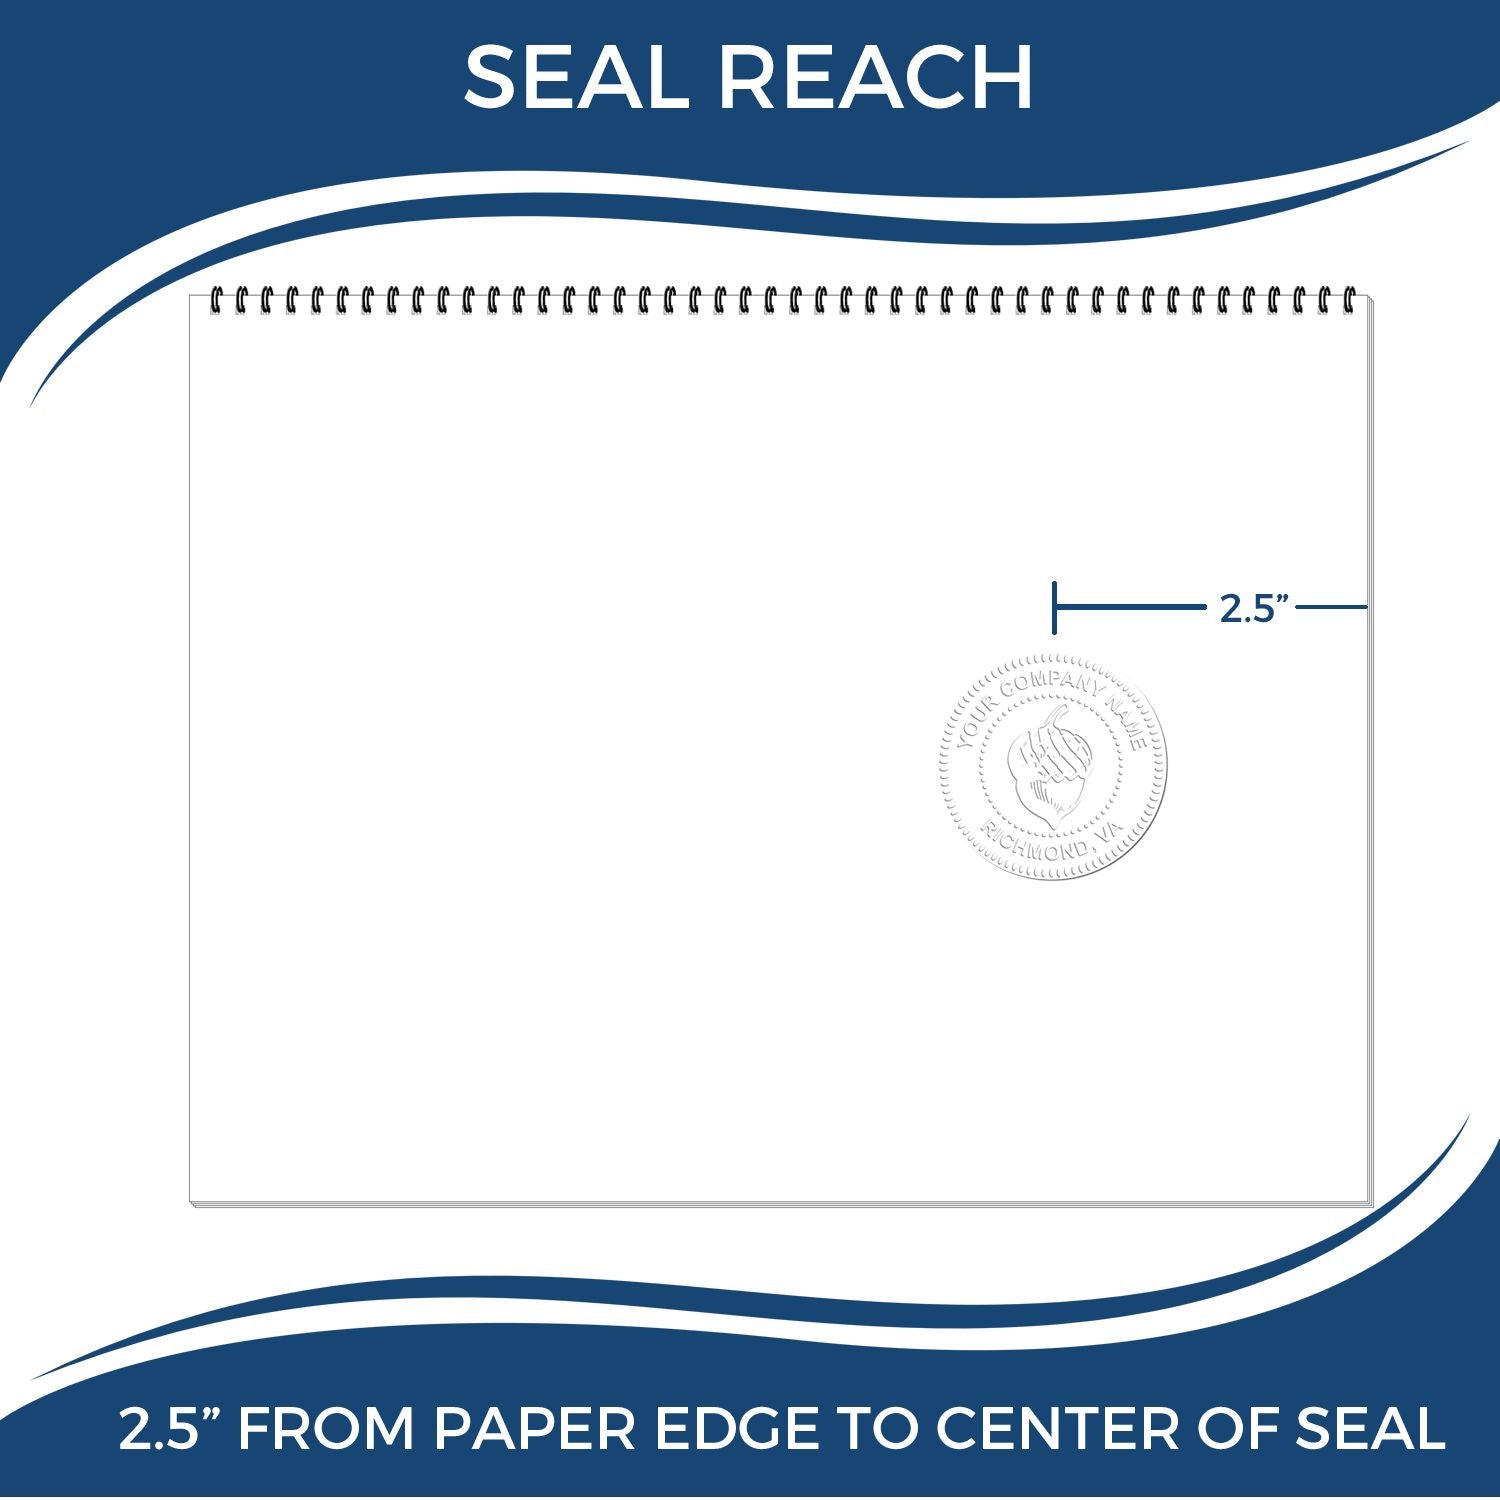 An infographic showing the seal reach which is represented by a ruler and a miniature seal image of the Heavy Duty Cast Iron Pennsylvania Engineer Seal Embosser